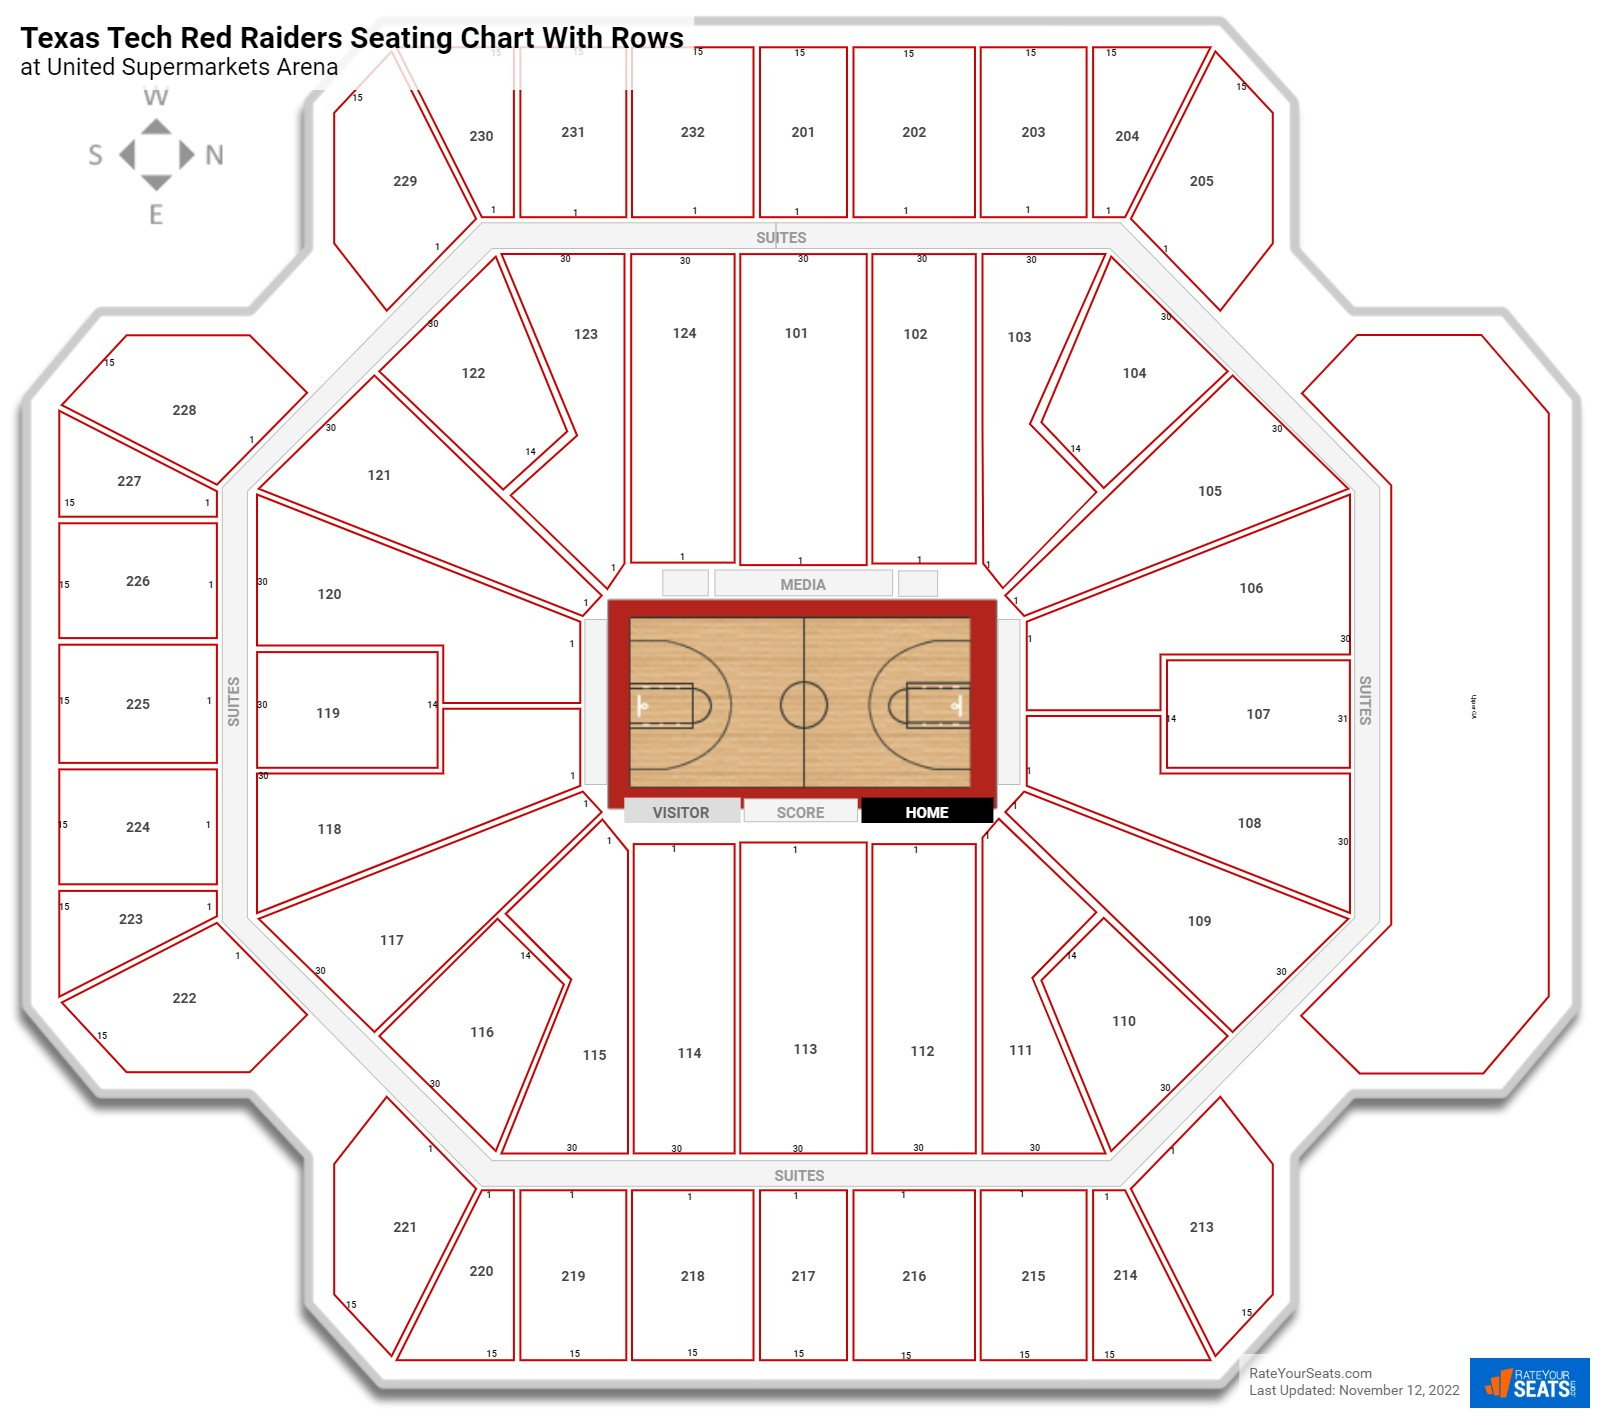 United Supermarkets Arena seating chart with row numbers